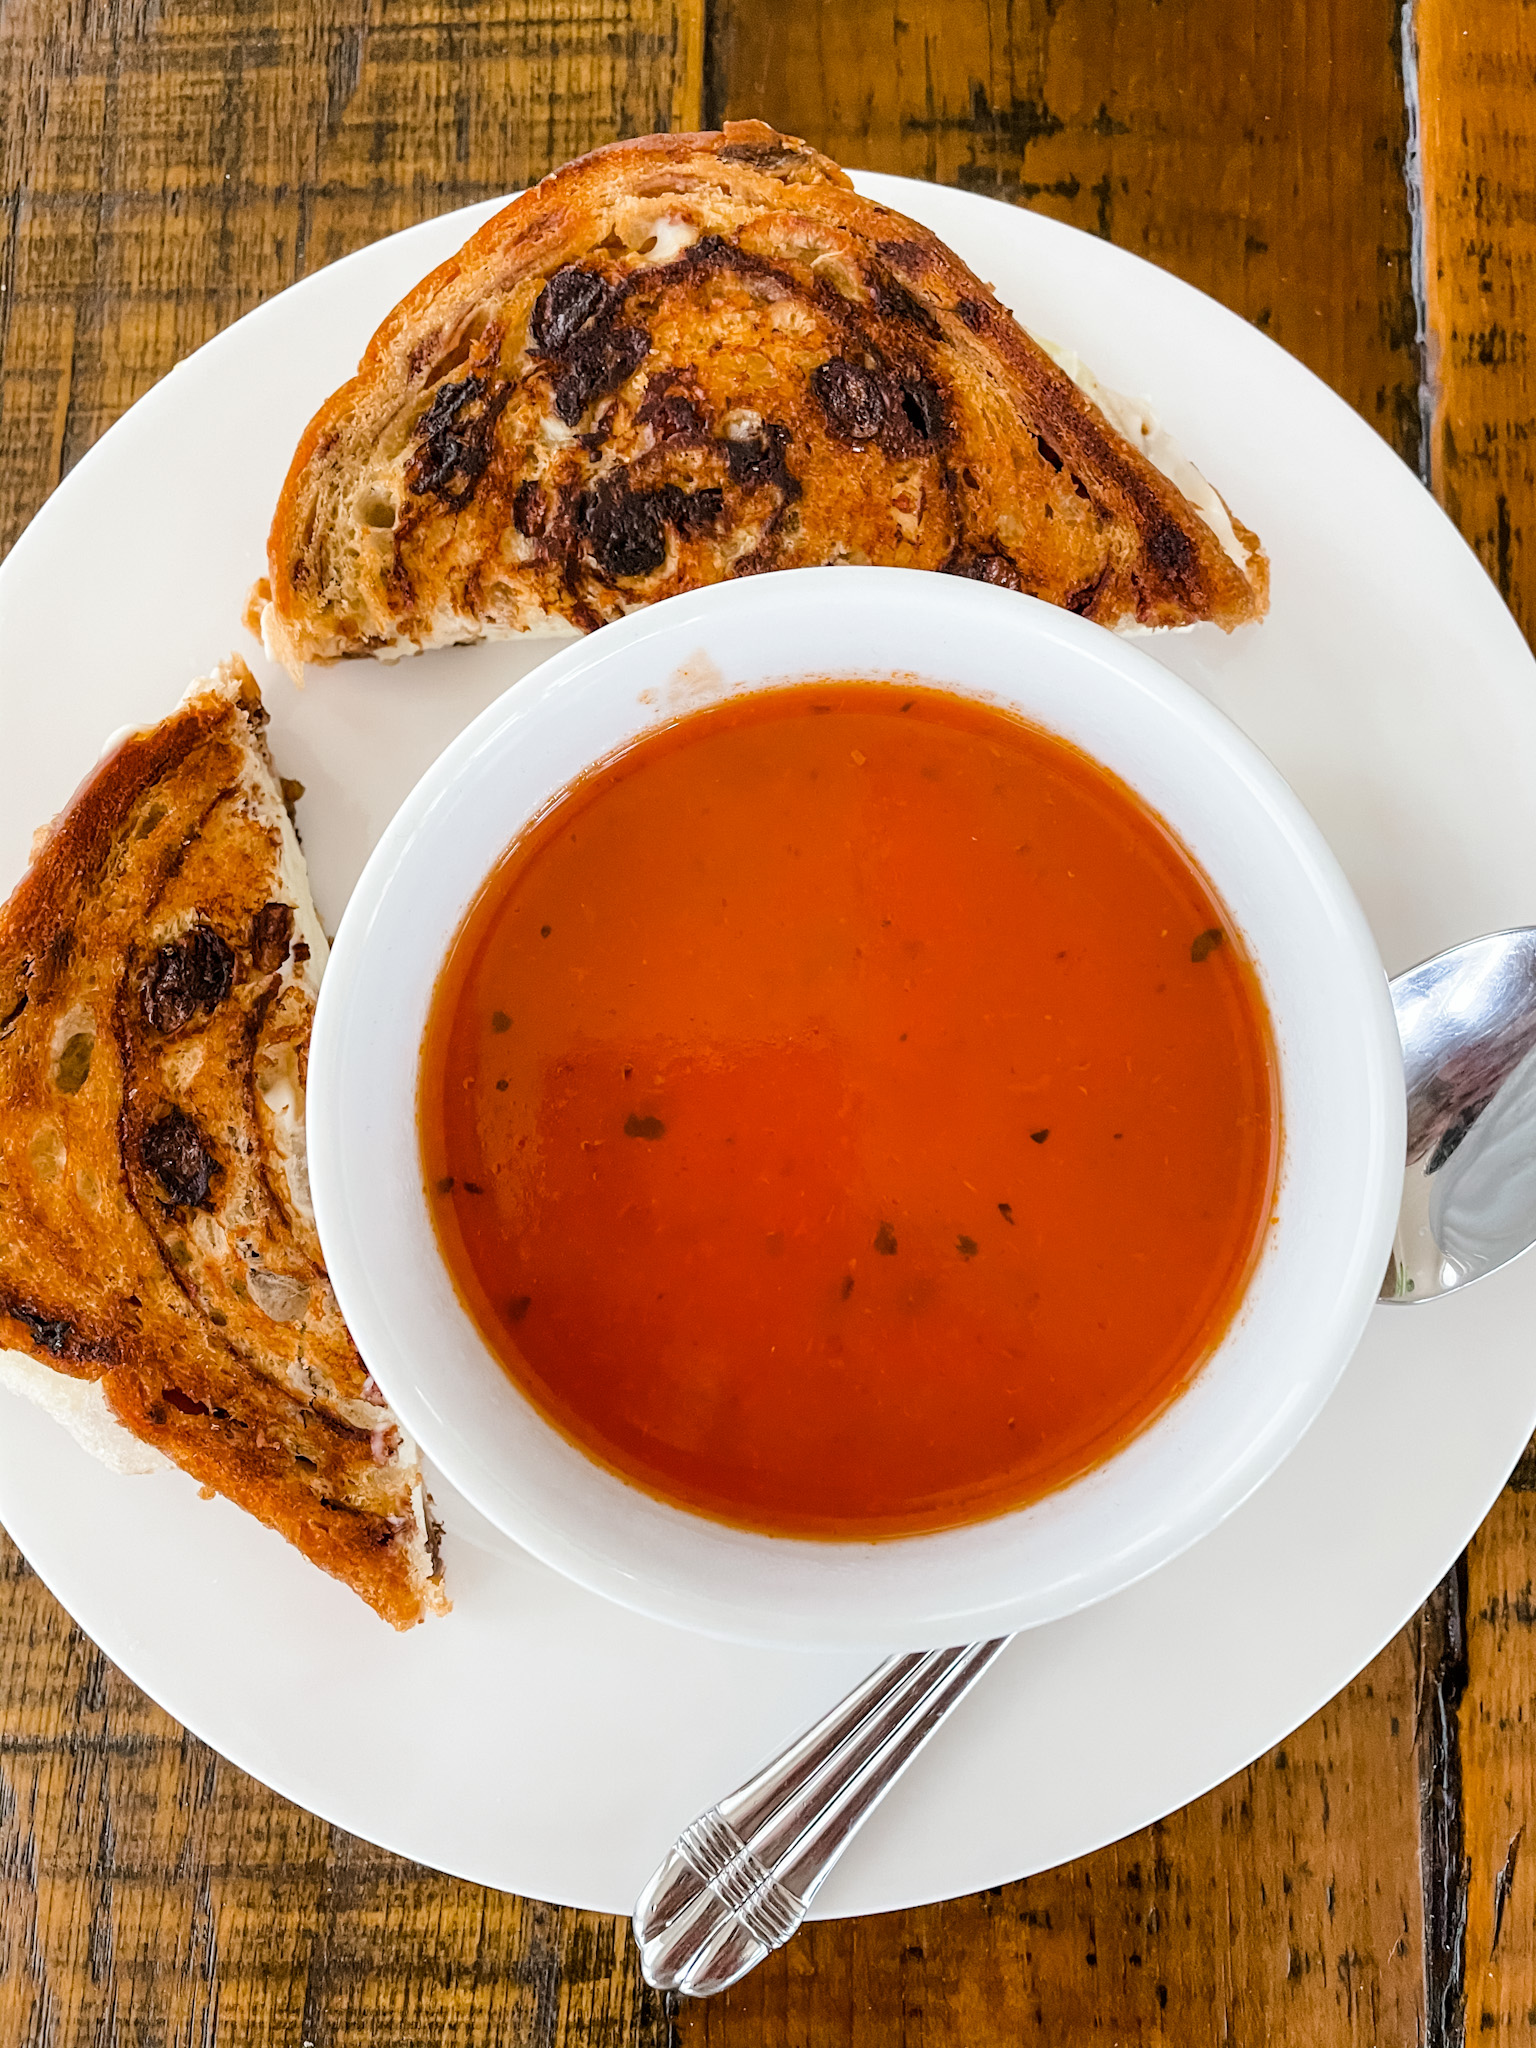 A cut in half Grilled Apple and Brie Cheese Sandwiches placed next to the bowl of tomato soup